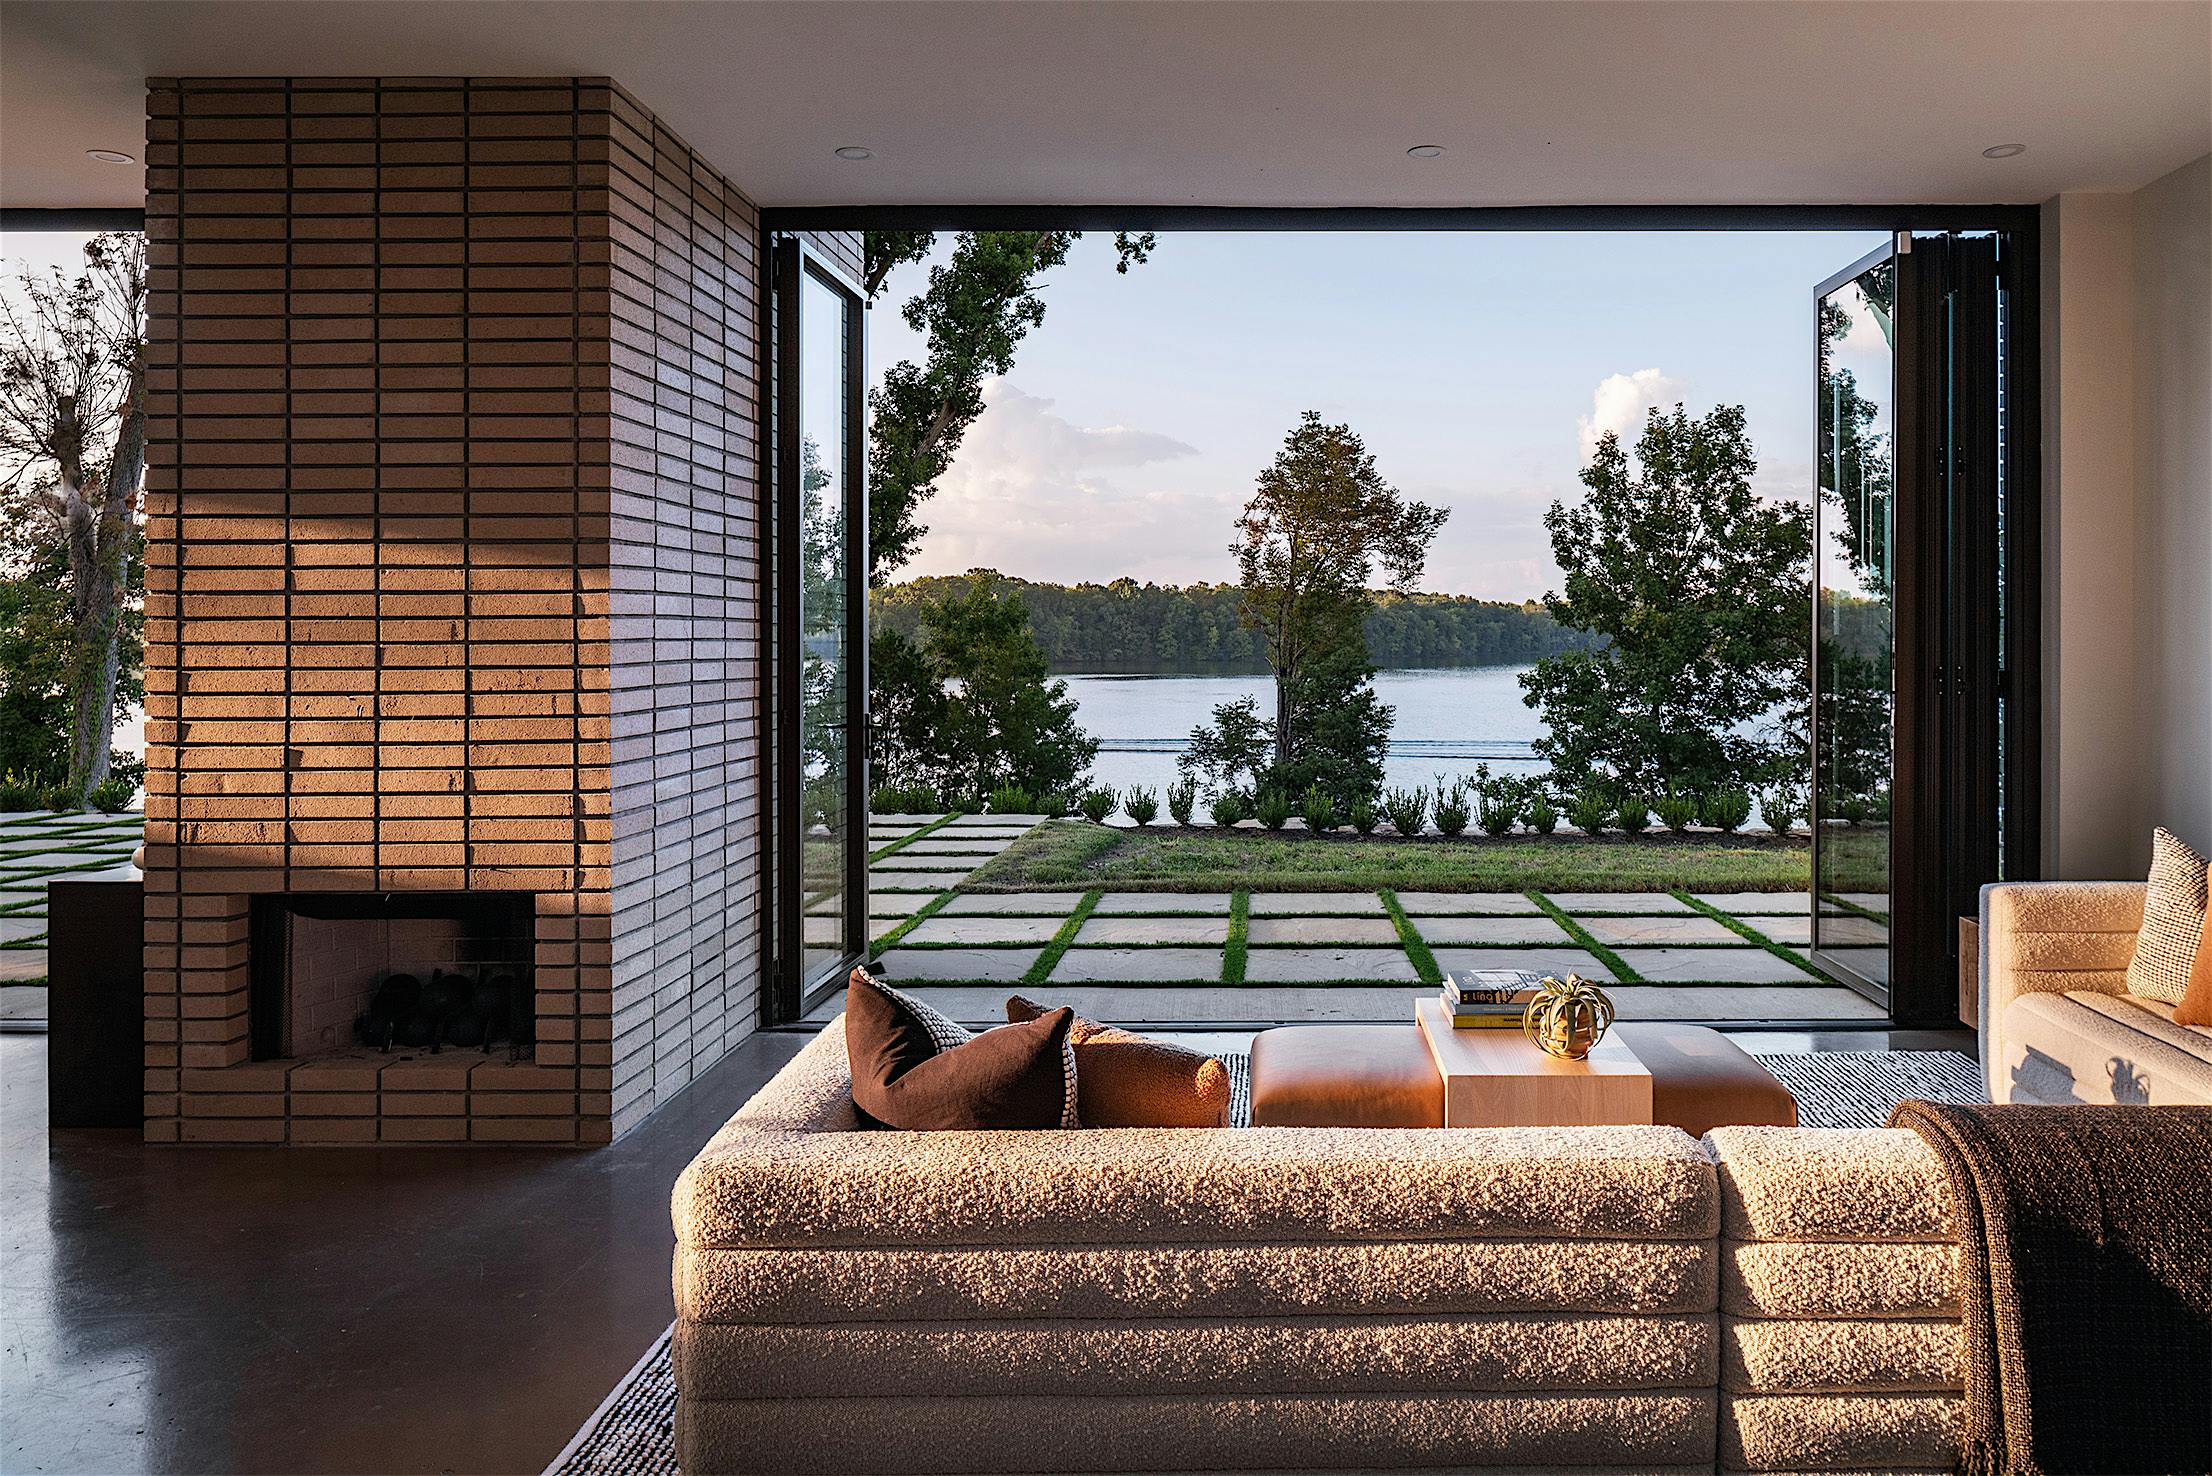 Generation 4 residential glass wall systems at lakefront